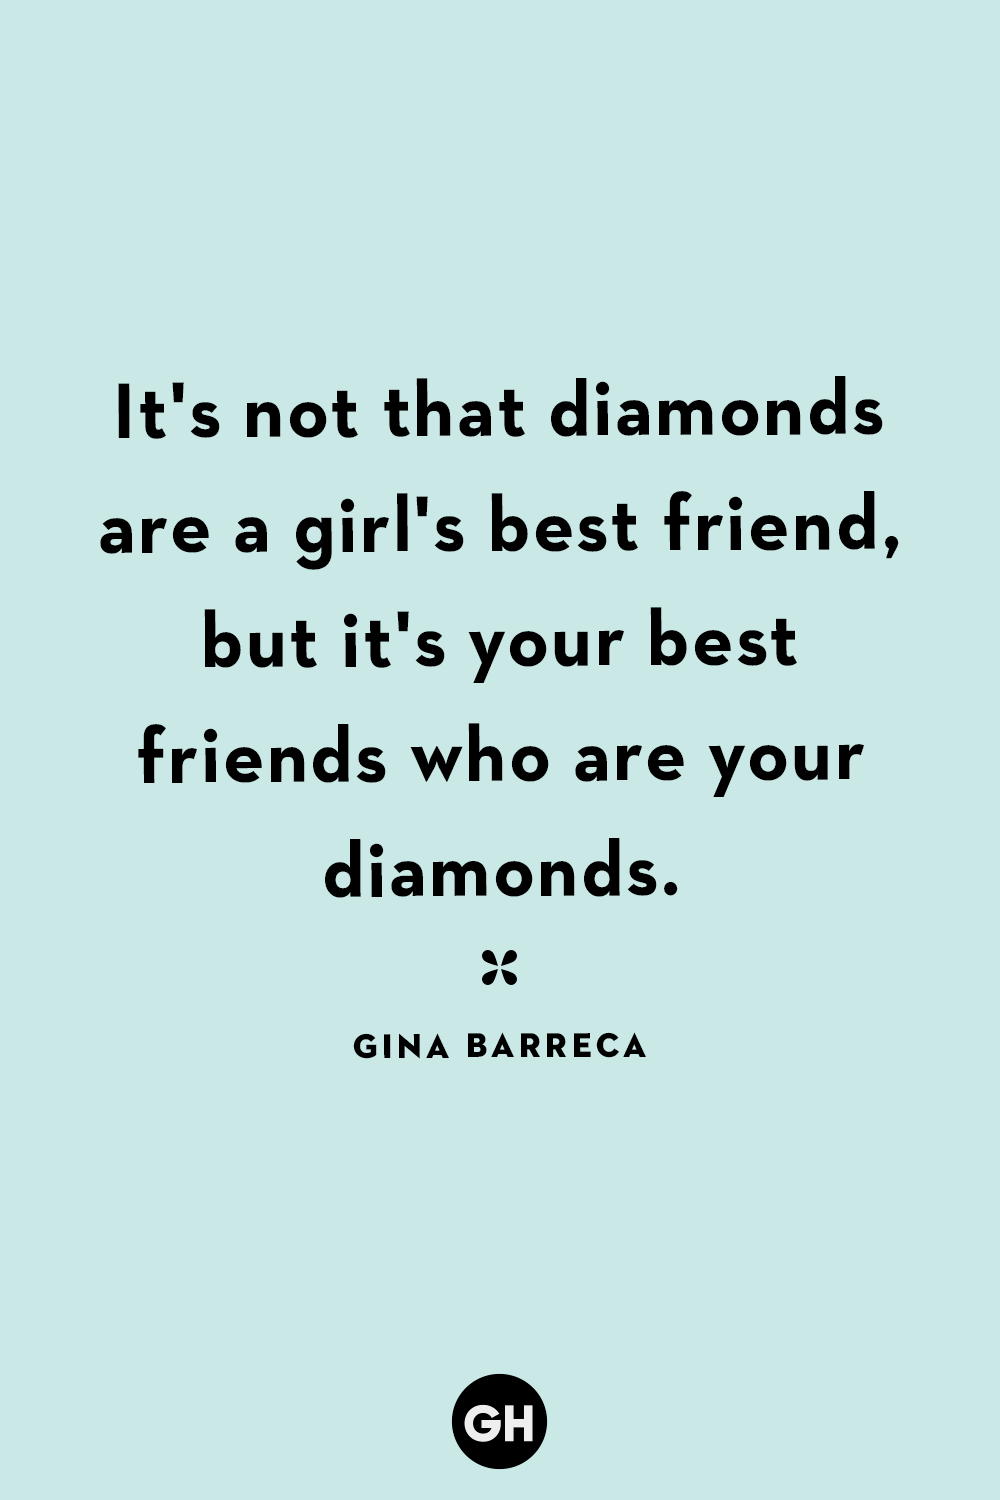 12 Best Friendship Quotes   Cute Short Sayings About Best Friends